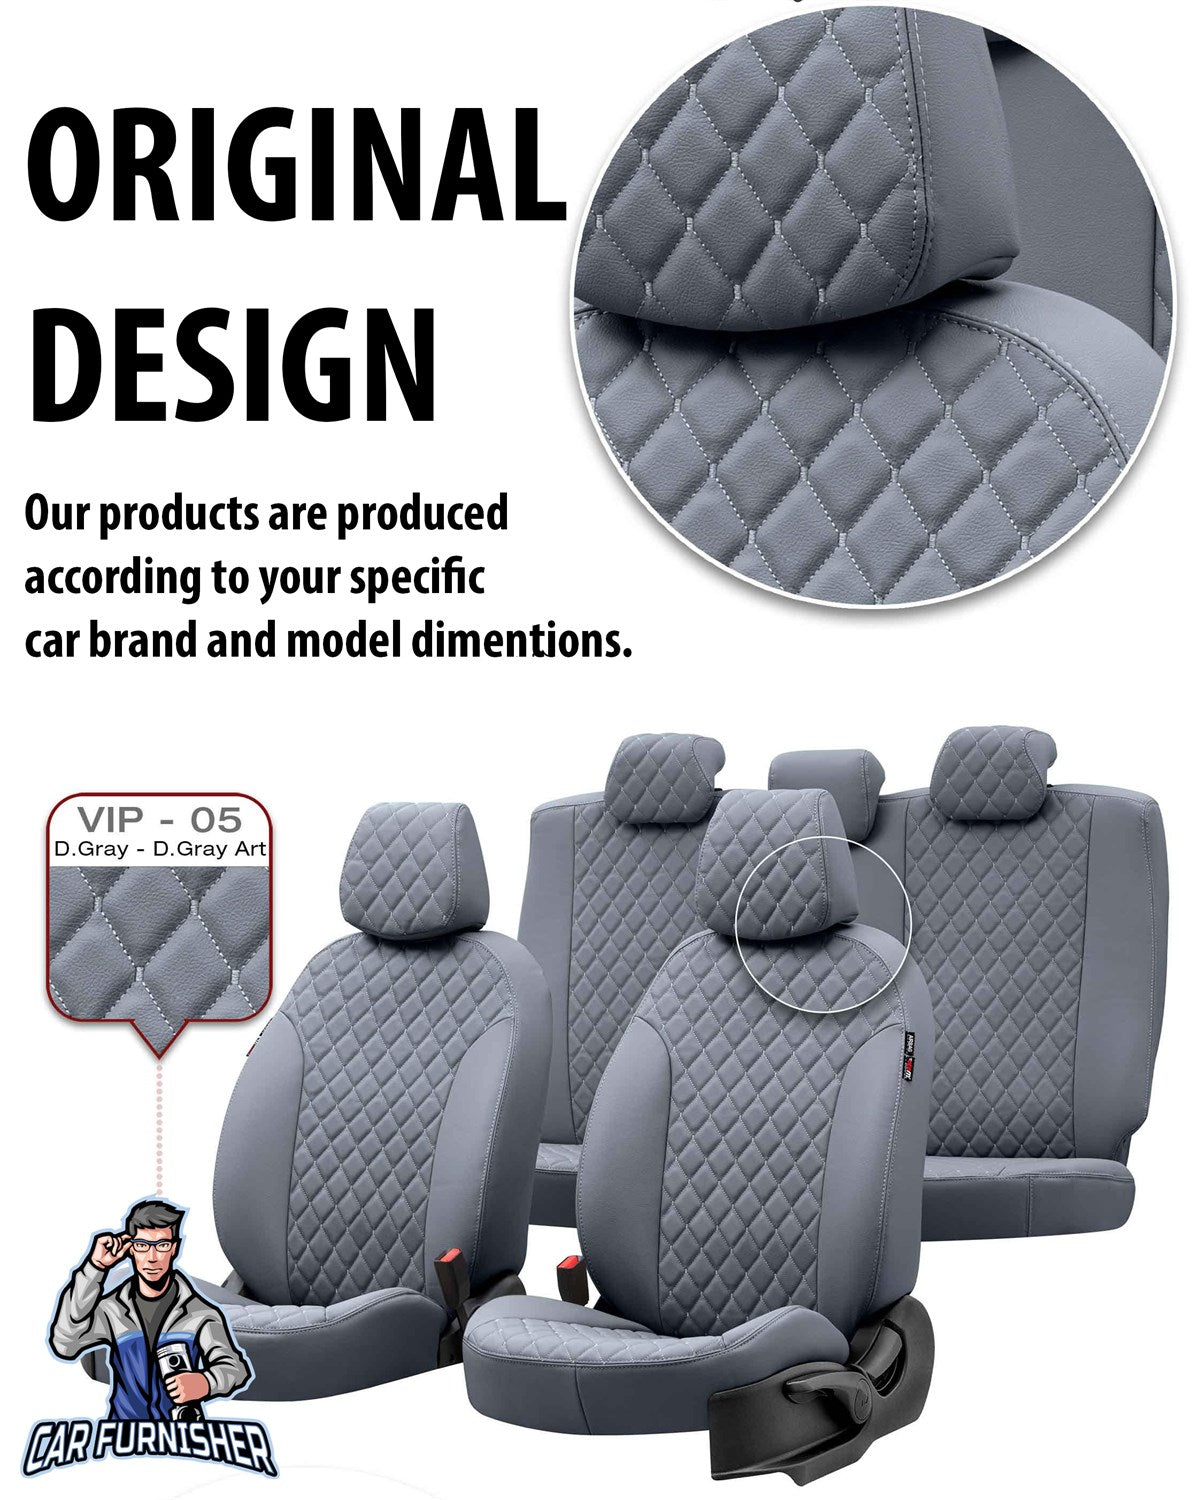 Ford Ecosport Seat Covers Madrid Leather Design Smoked Leather